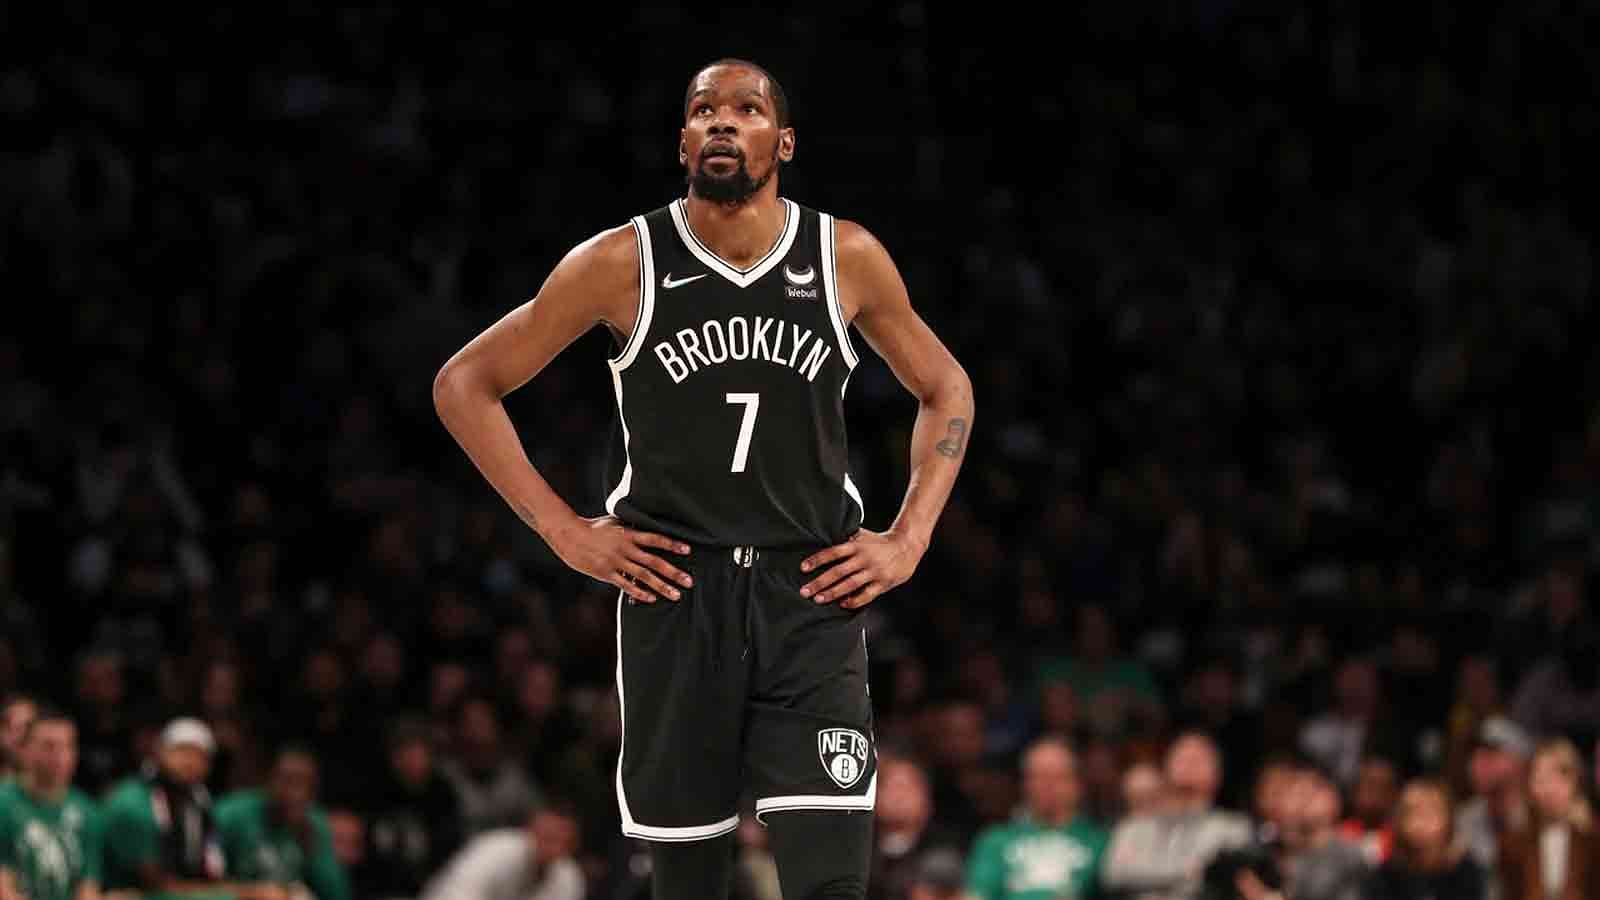 Kevin Durant would have to honor his contract if the Brooklyn Nets refuse to trade him. [Photo: NBC Sports]